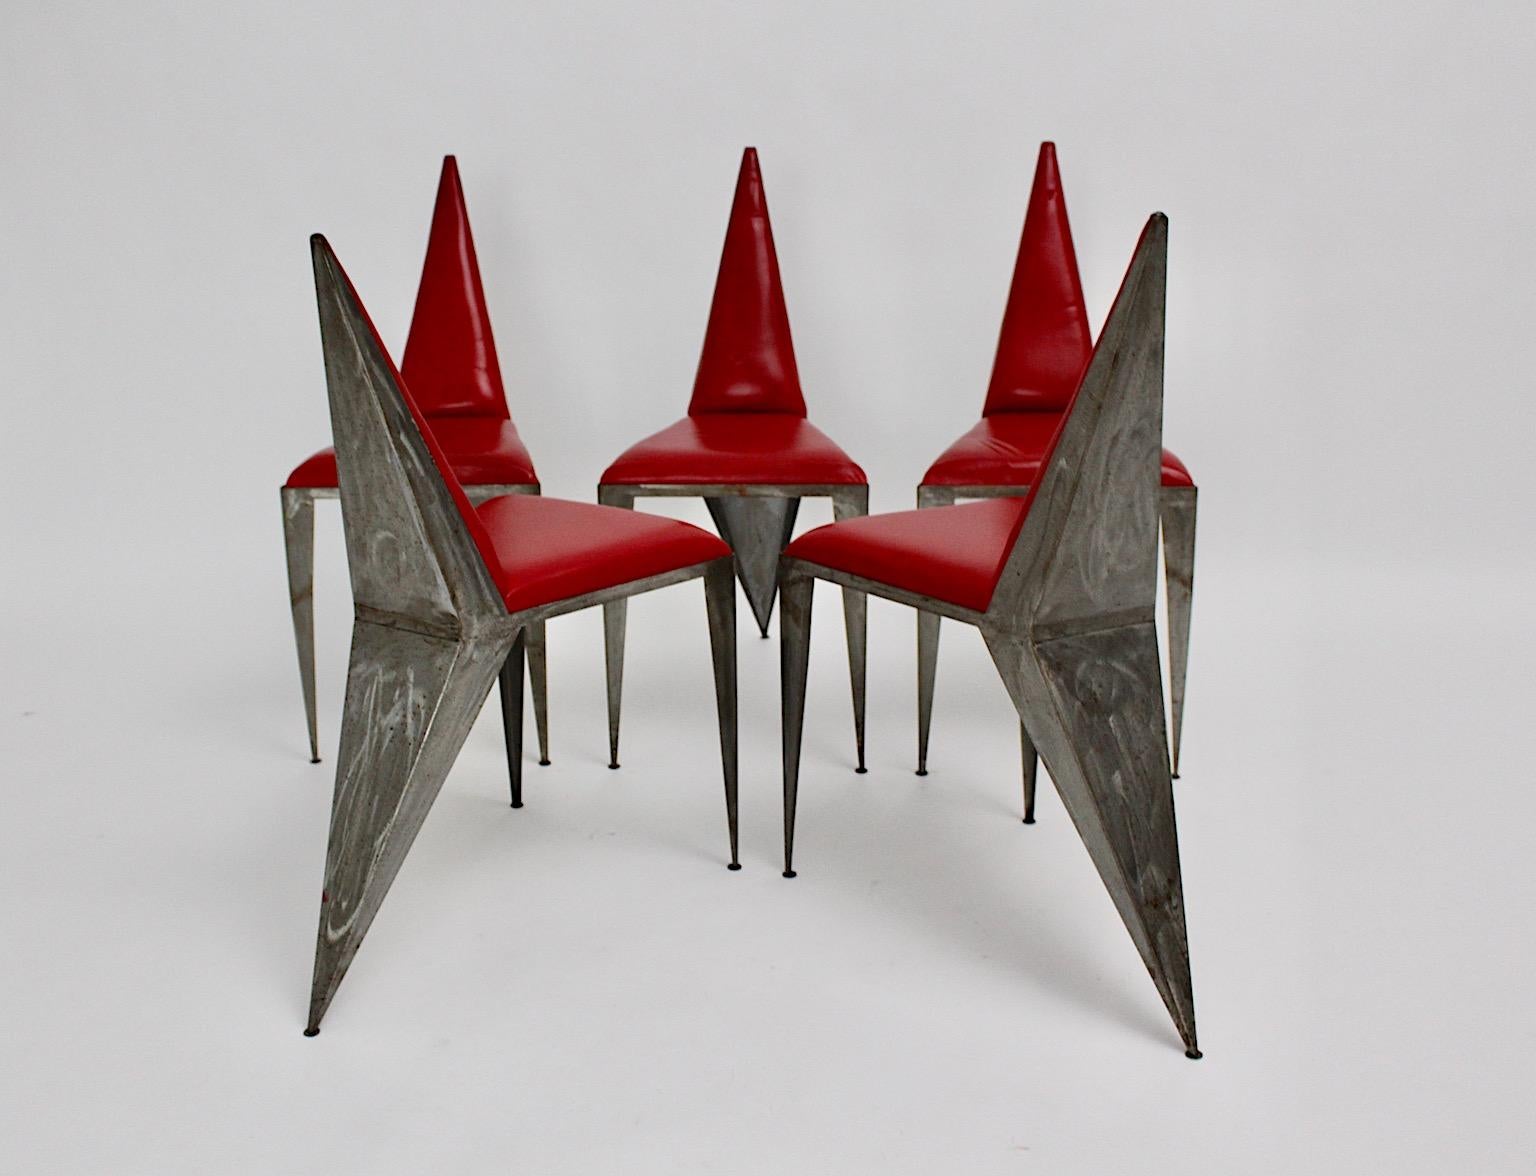 A red leather iron vintage geometric set of 5 dining chairs or chairs, which were designed and executed in Austria 1960s.
The untreated brushed iron frame with three legs and a pointed back seat features a whimsical appearance and looks like